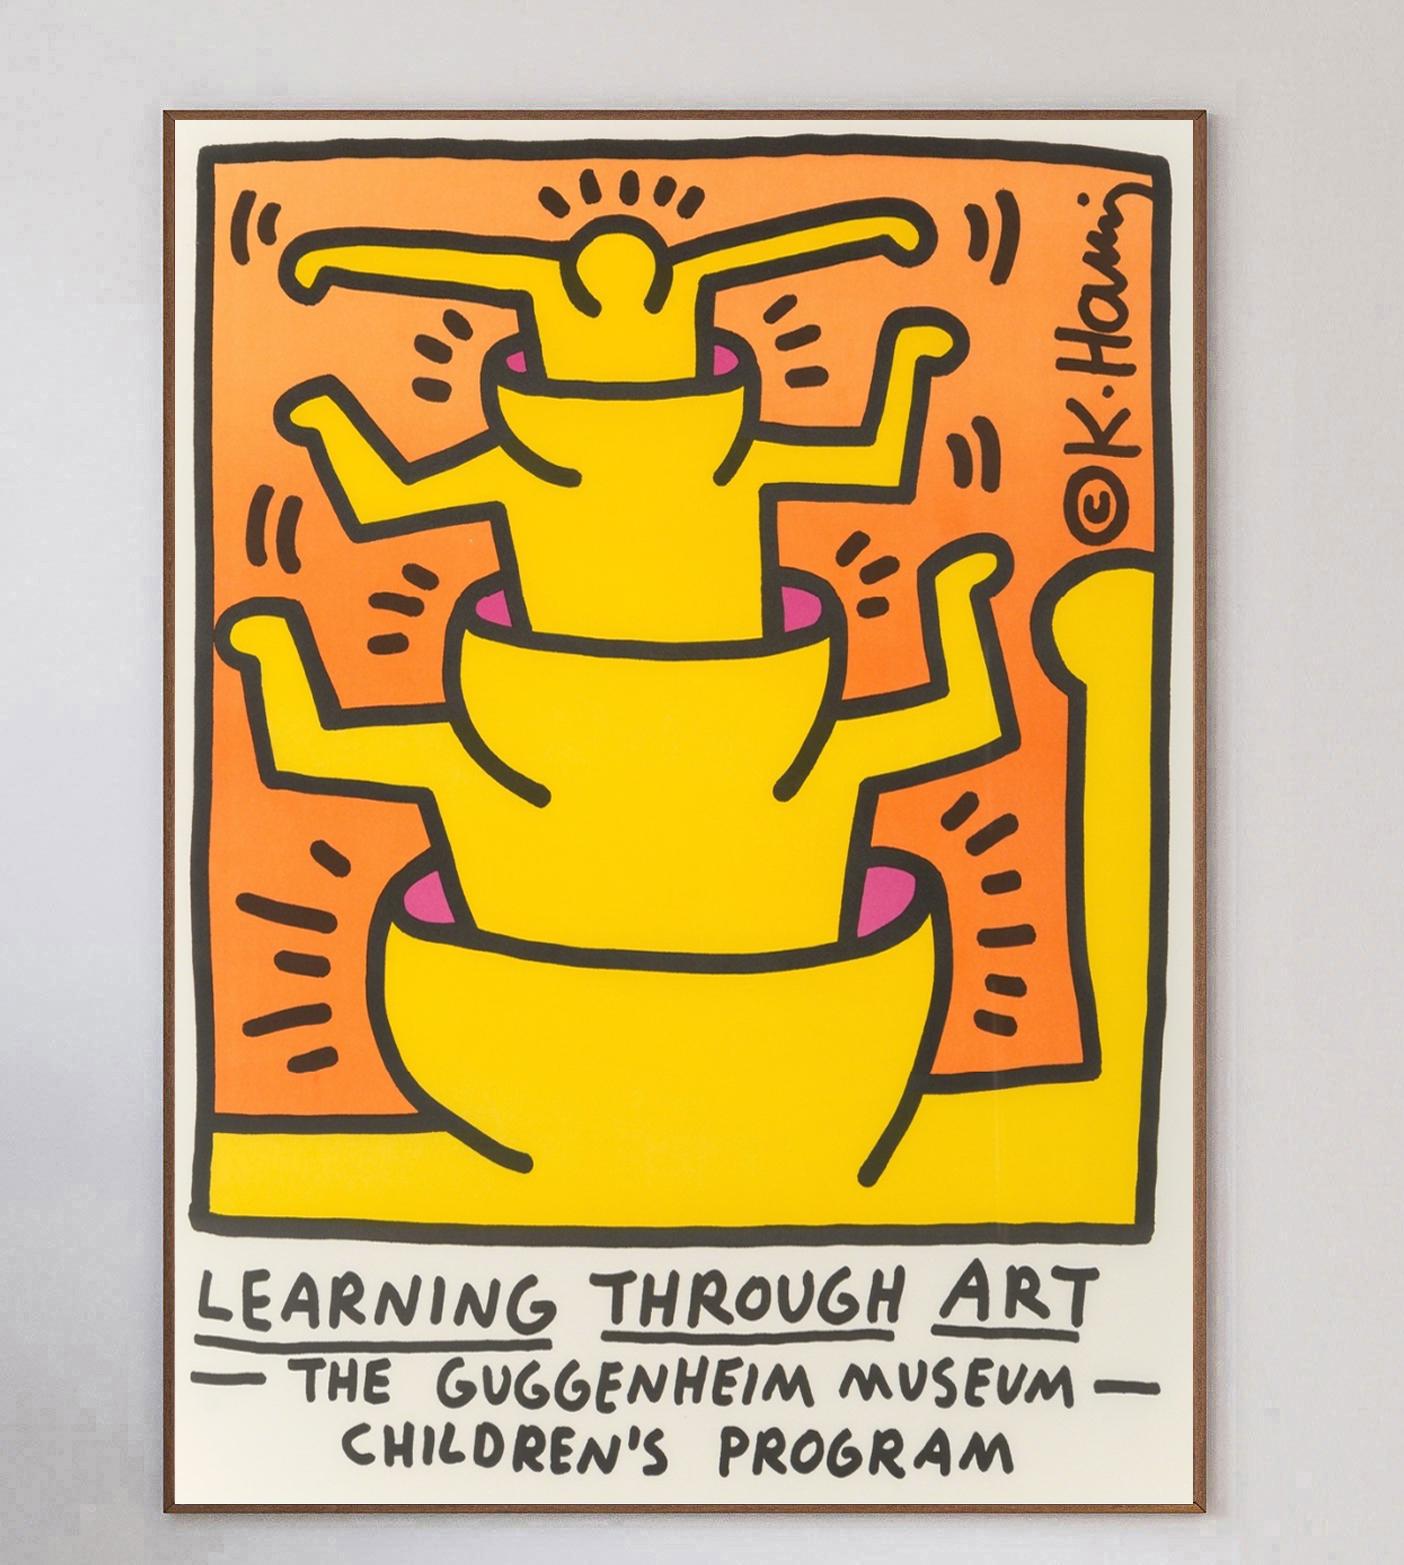 Beautiful poster from 1999 from The Guggenheim Museum's Children's Program 